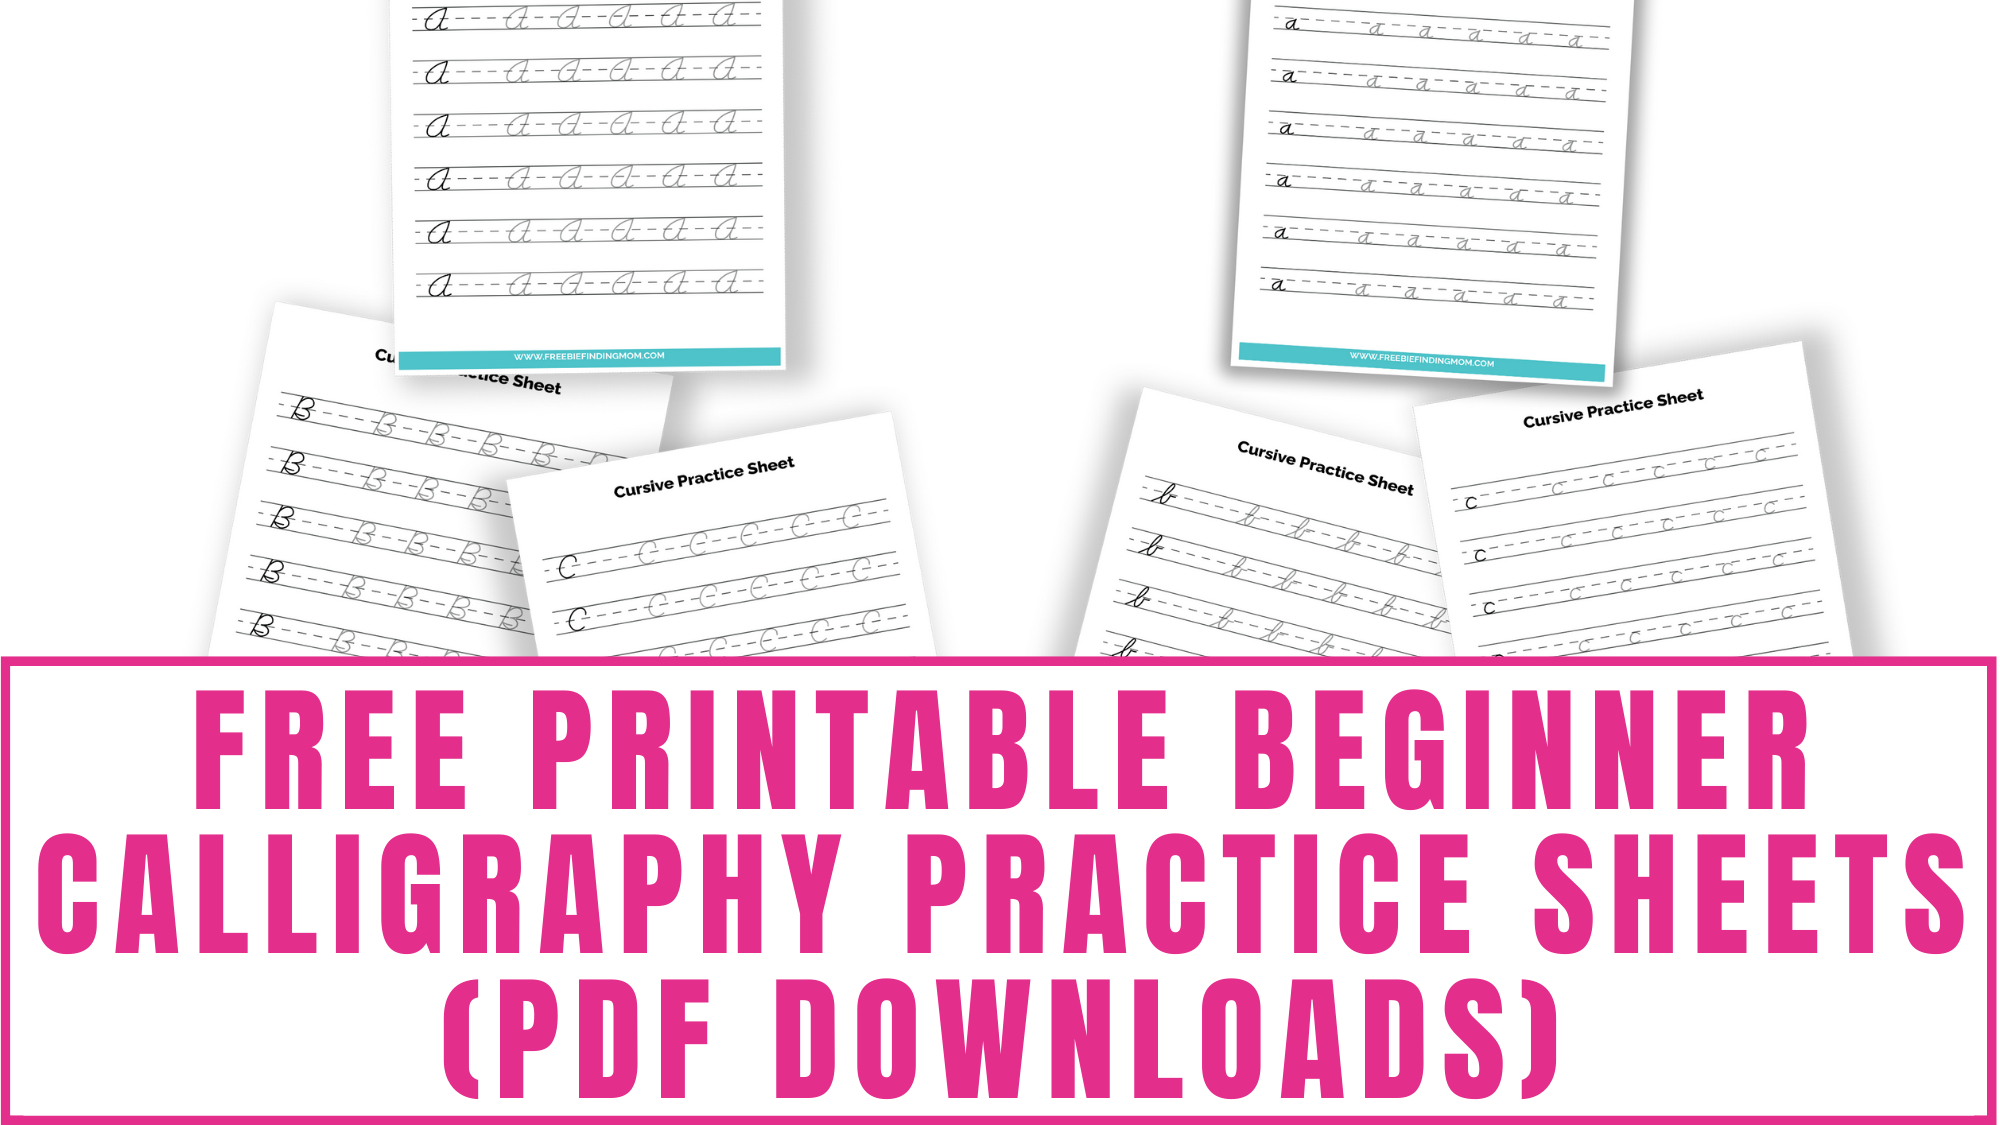 Free Beginner Calligraphy Practice Sheets (Pdfs) - Freebie Finding Mom regarding Calligraphy Practice Sheets Printable Free